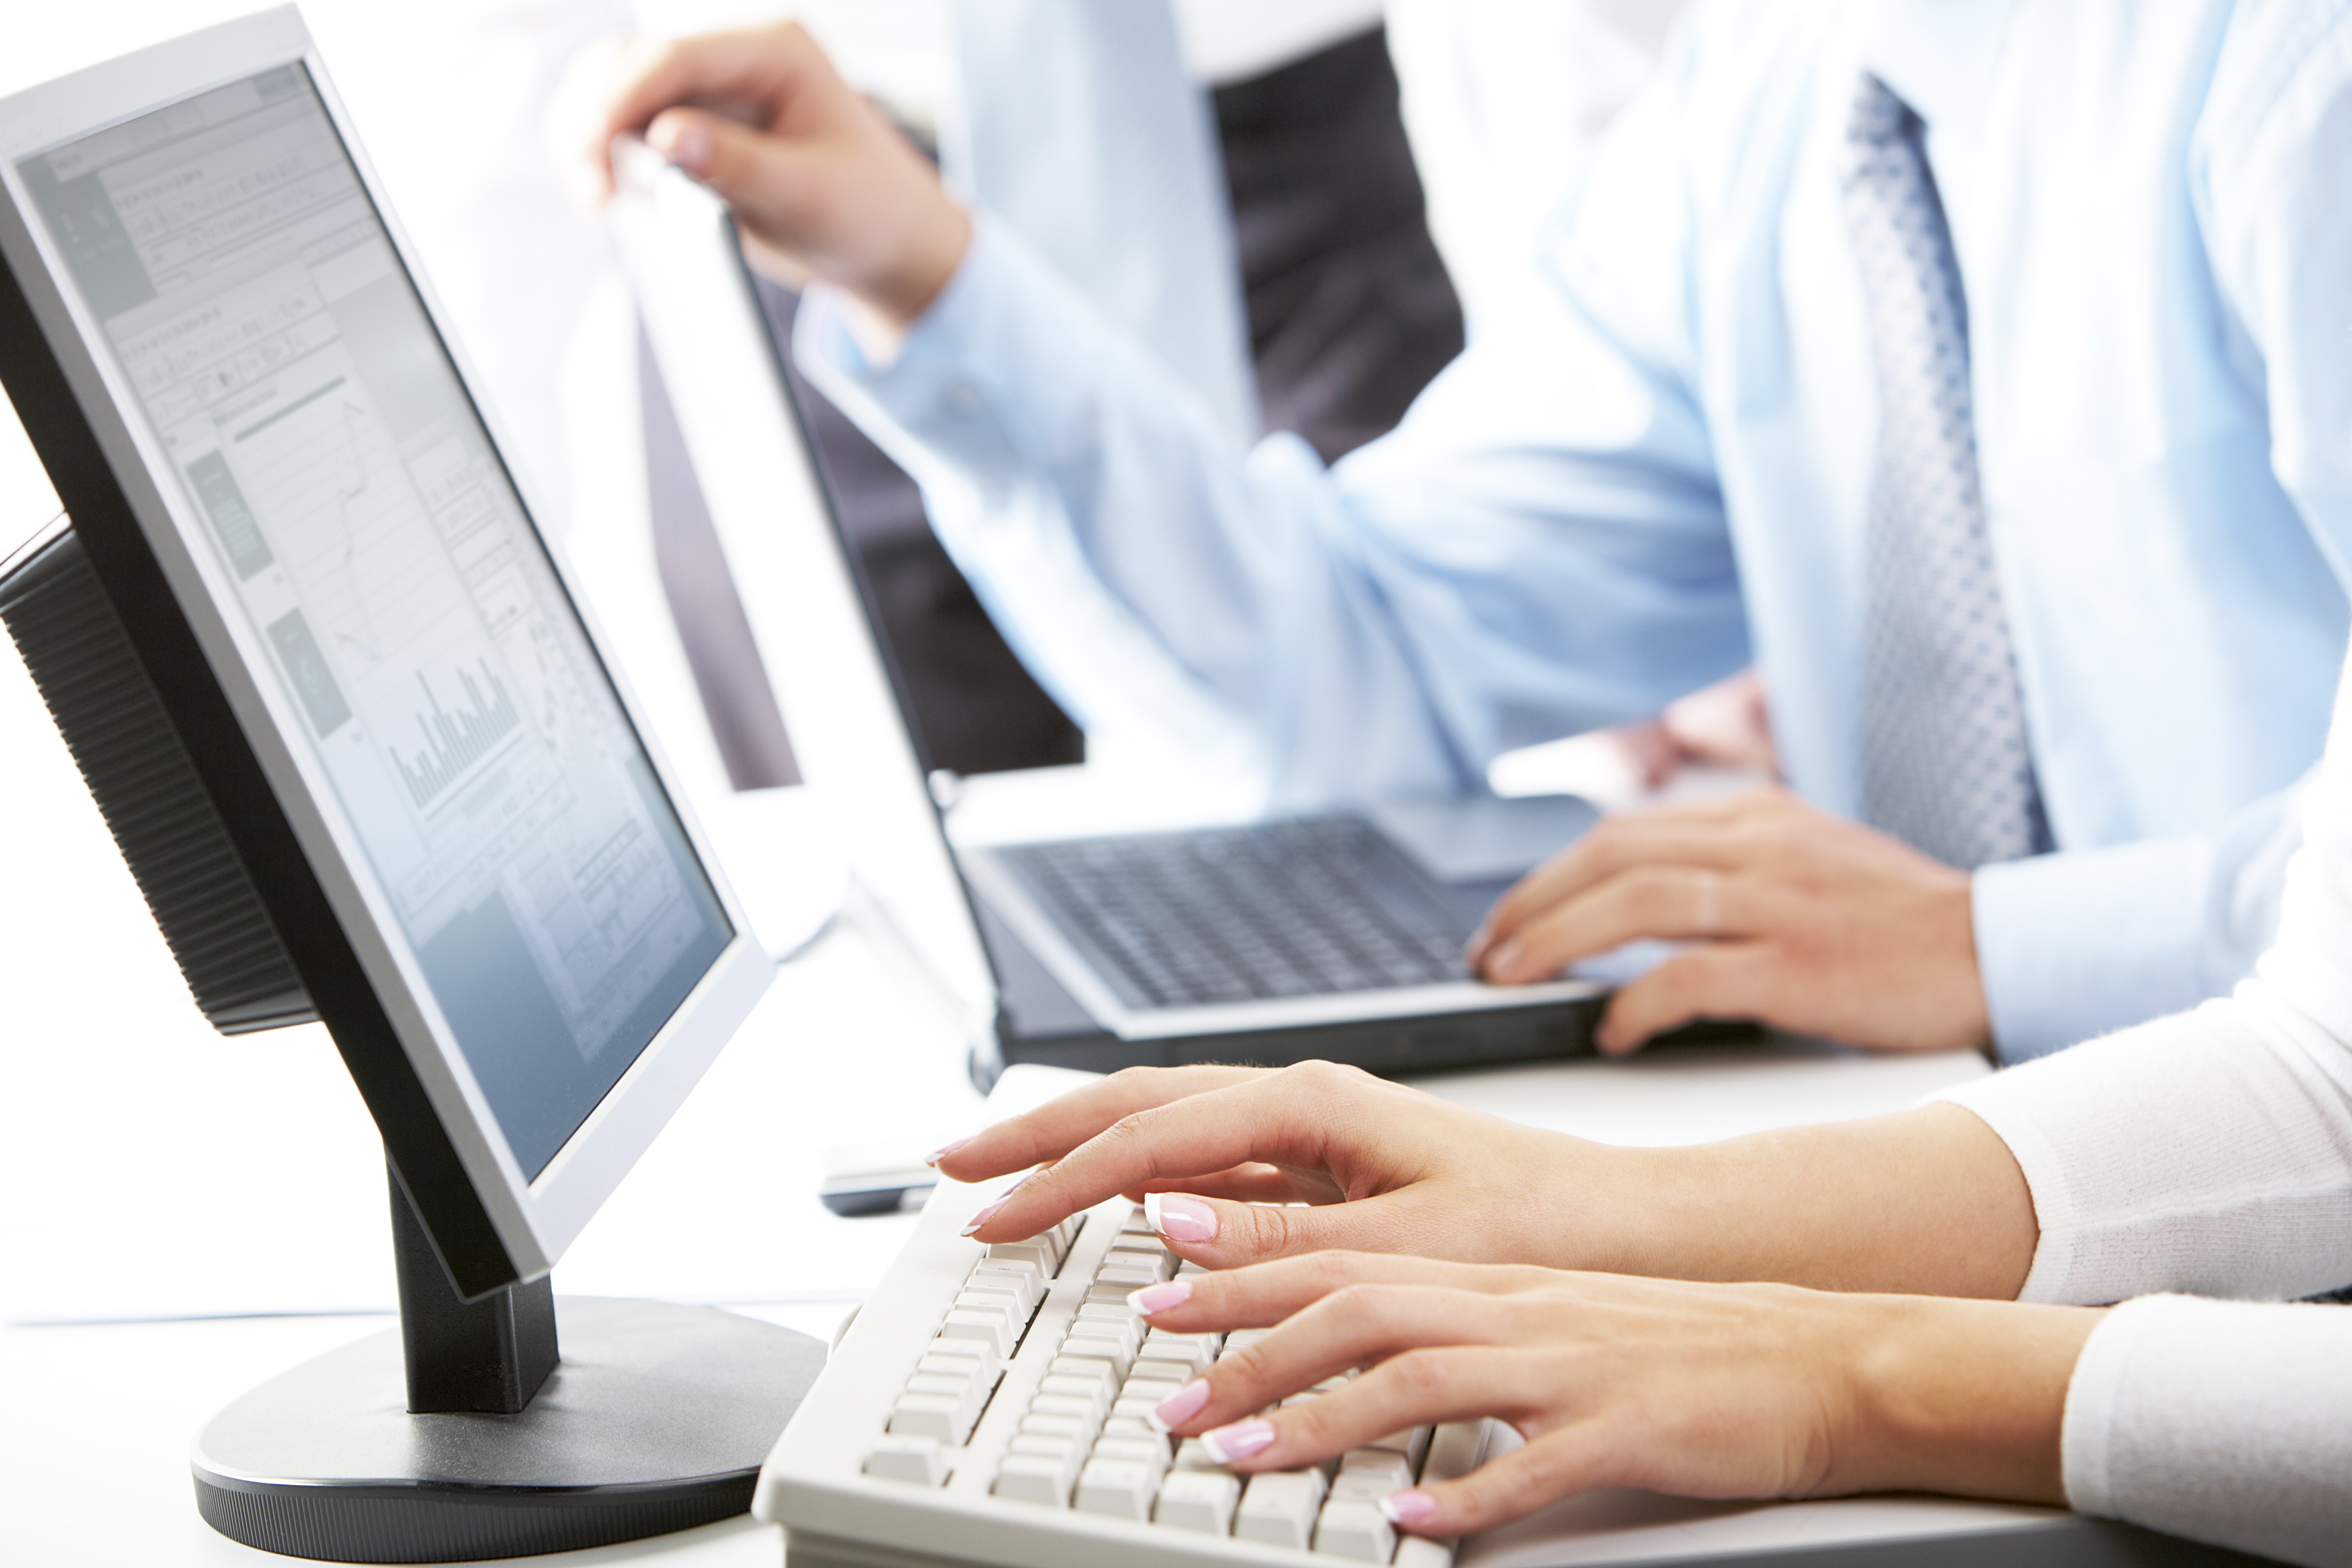 Image of female hands typing on keyboard in working environment